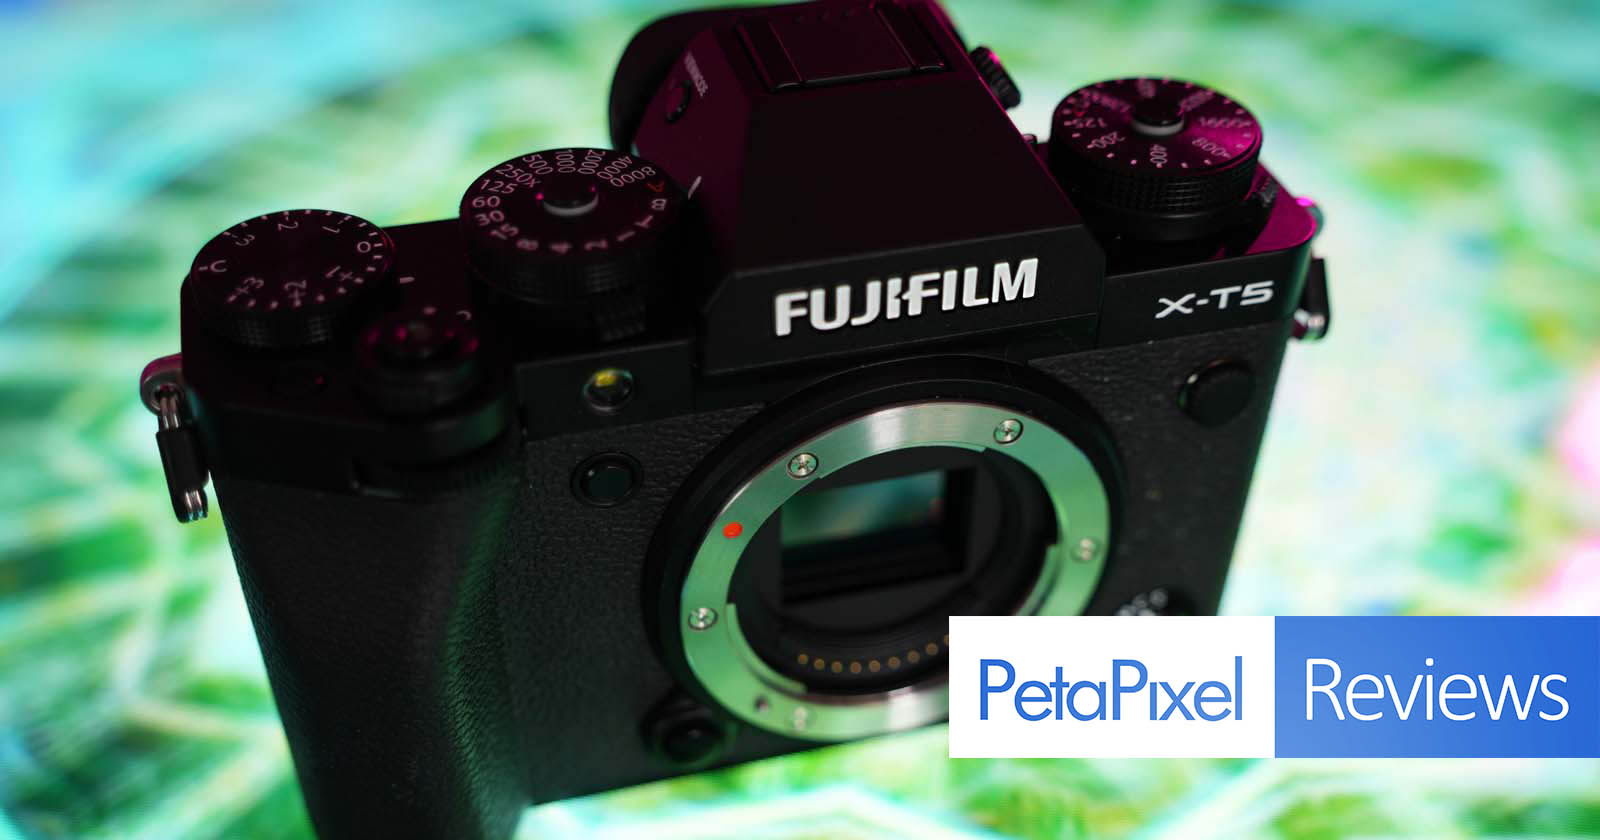 Fujifilm X-T5 Review: Compromises And Shortcomings Spoil A Great